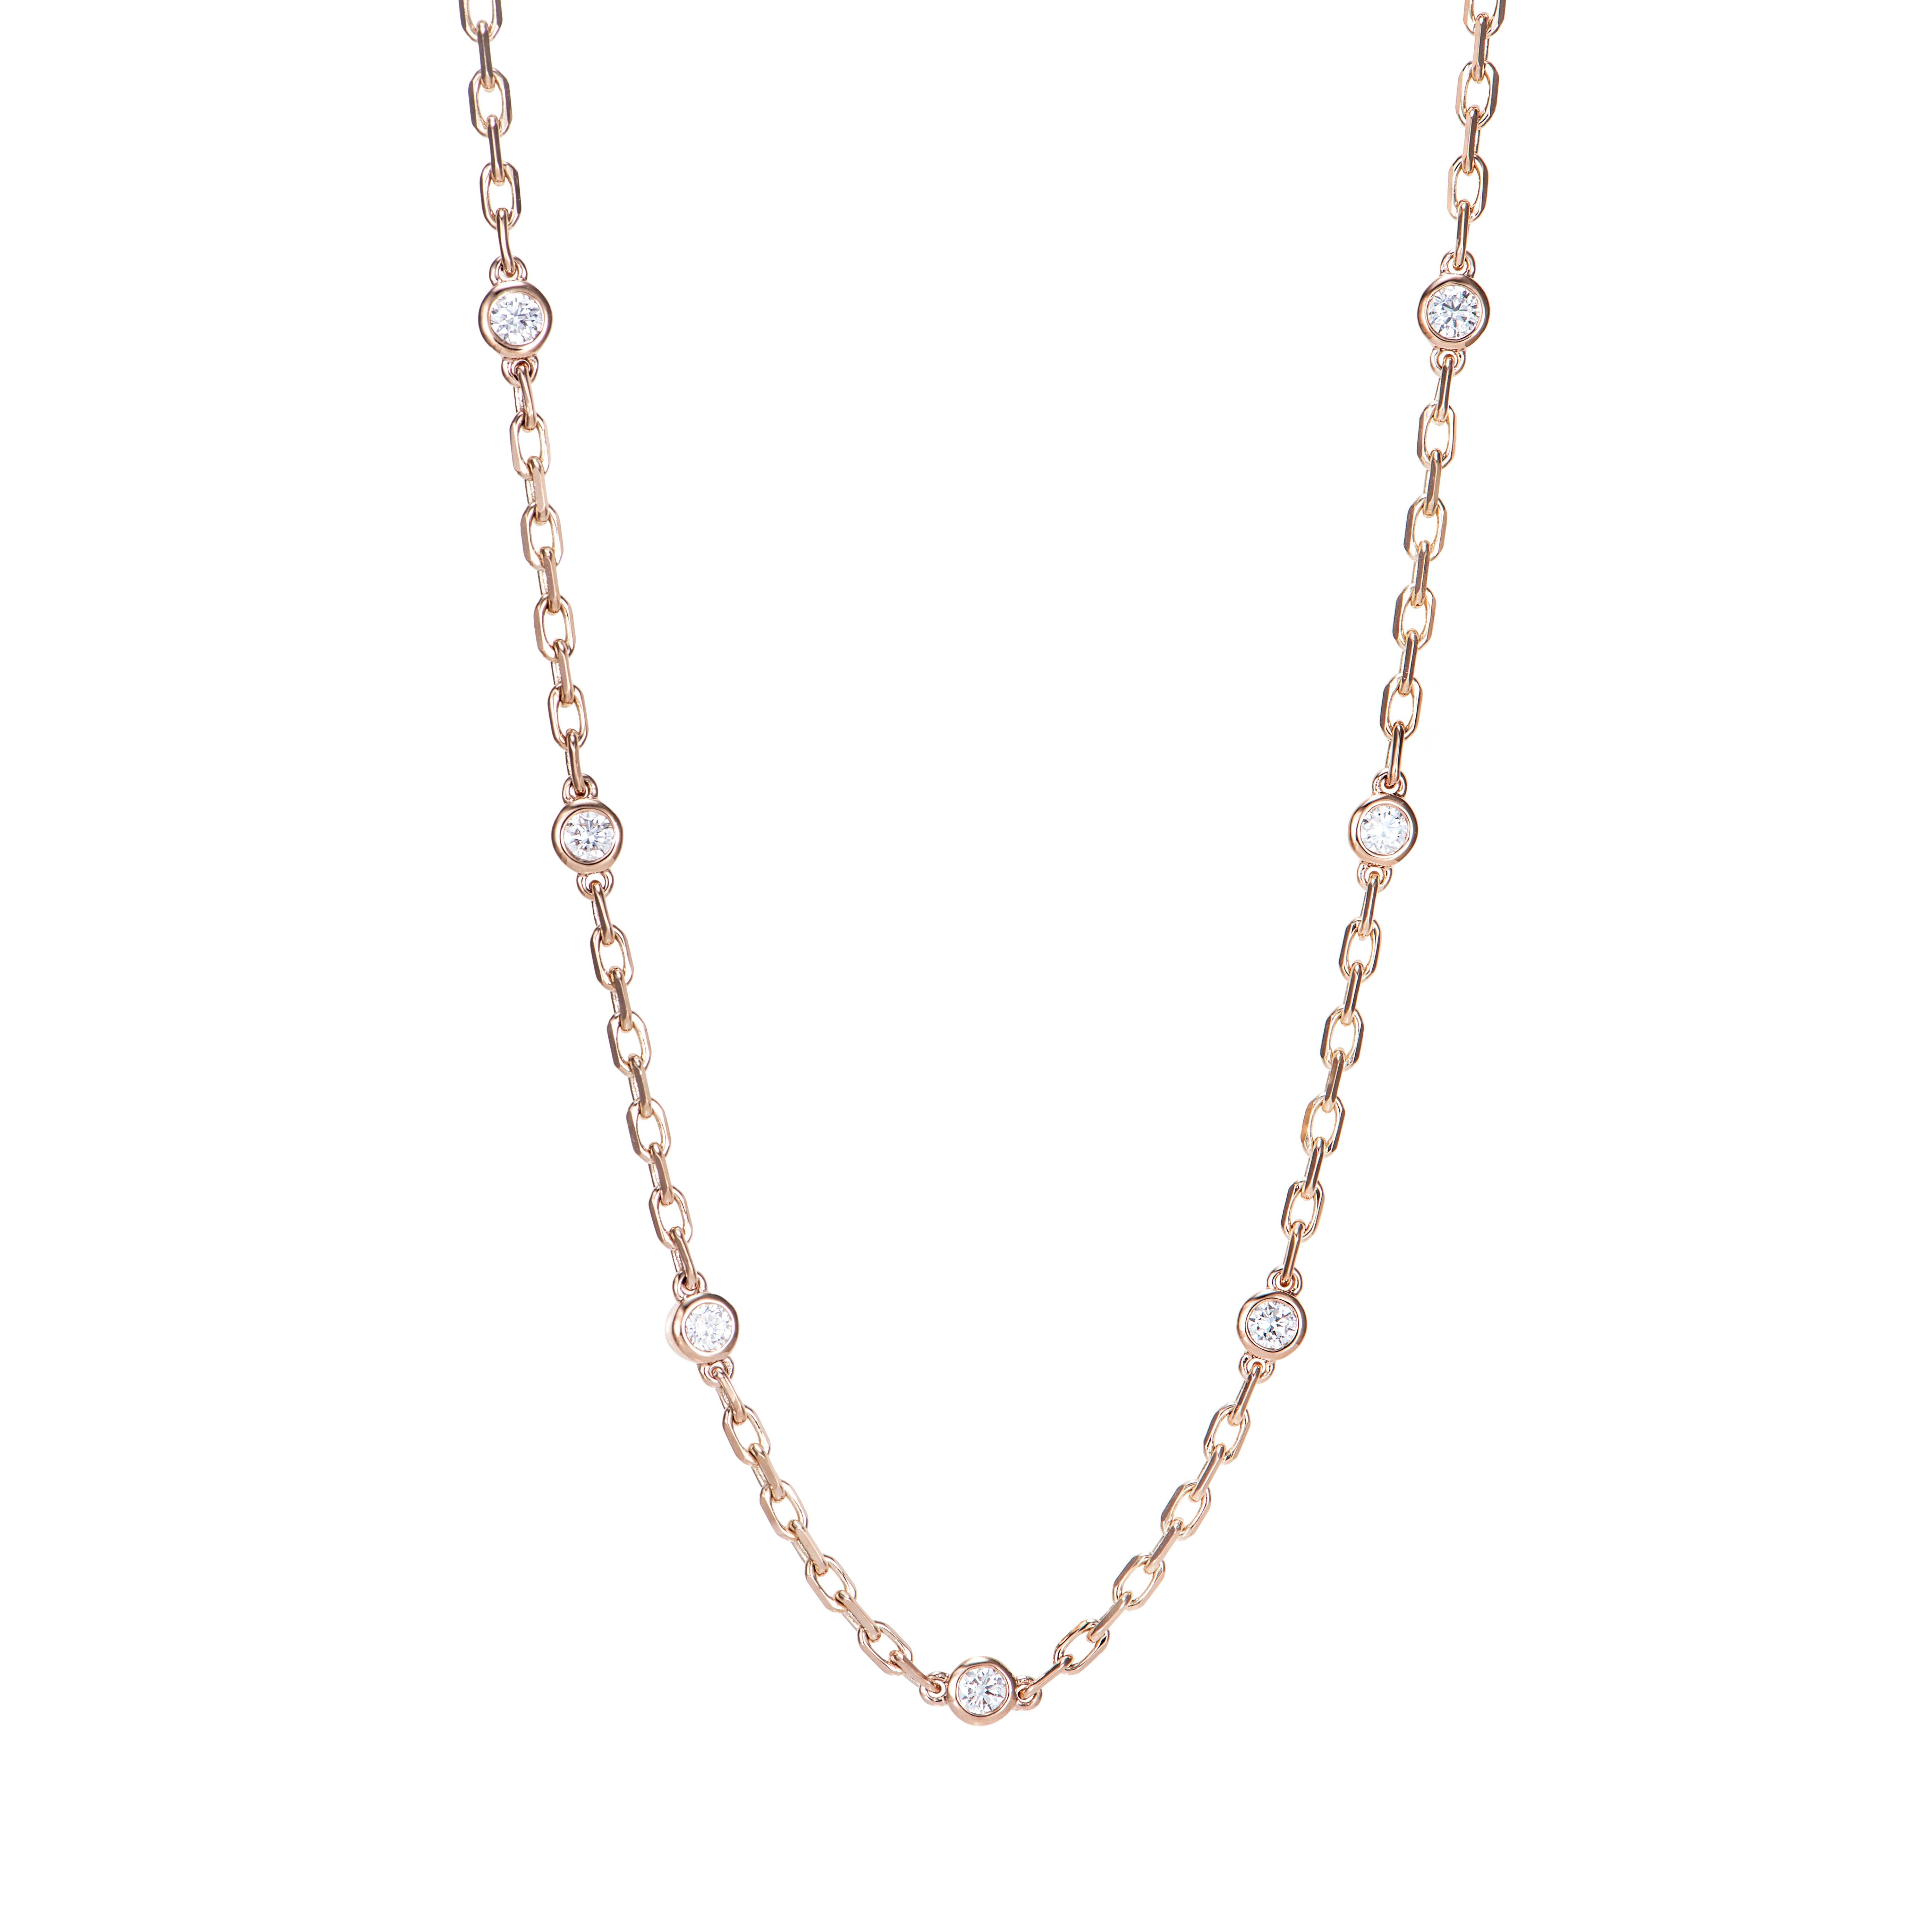 An elegant Necklace will add that final touch to your outfit. This Necklace are made in Rose Gold and present a classic yet elegant look. 

Diamond Chain Necklace in 18Karat Rose Gold.

Diamond: 1.66 carat, 2.80mm size, round shape, G color, VS